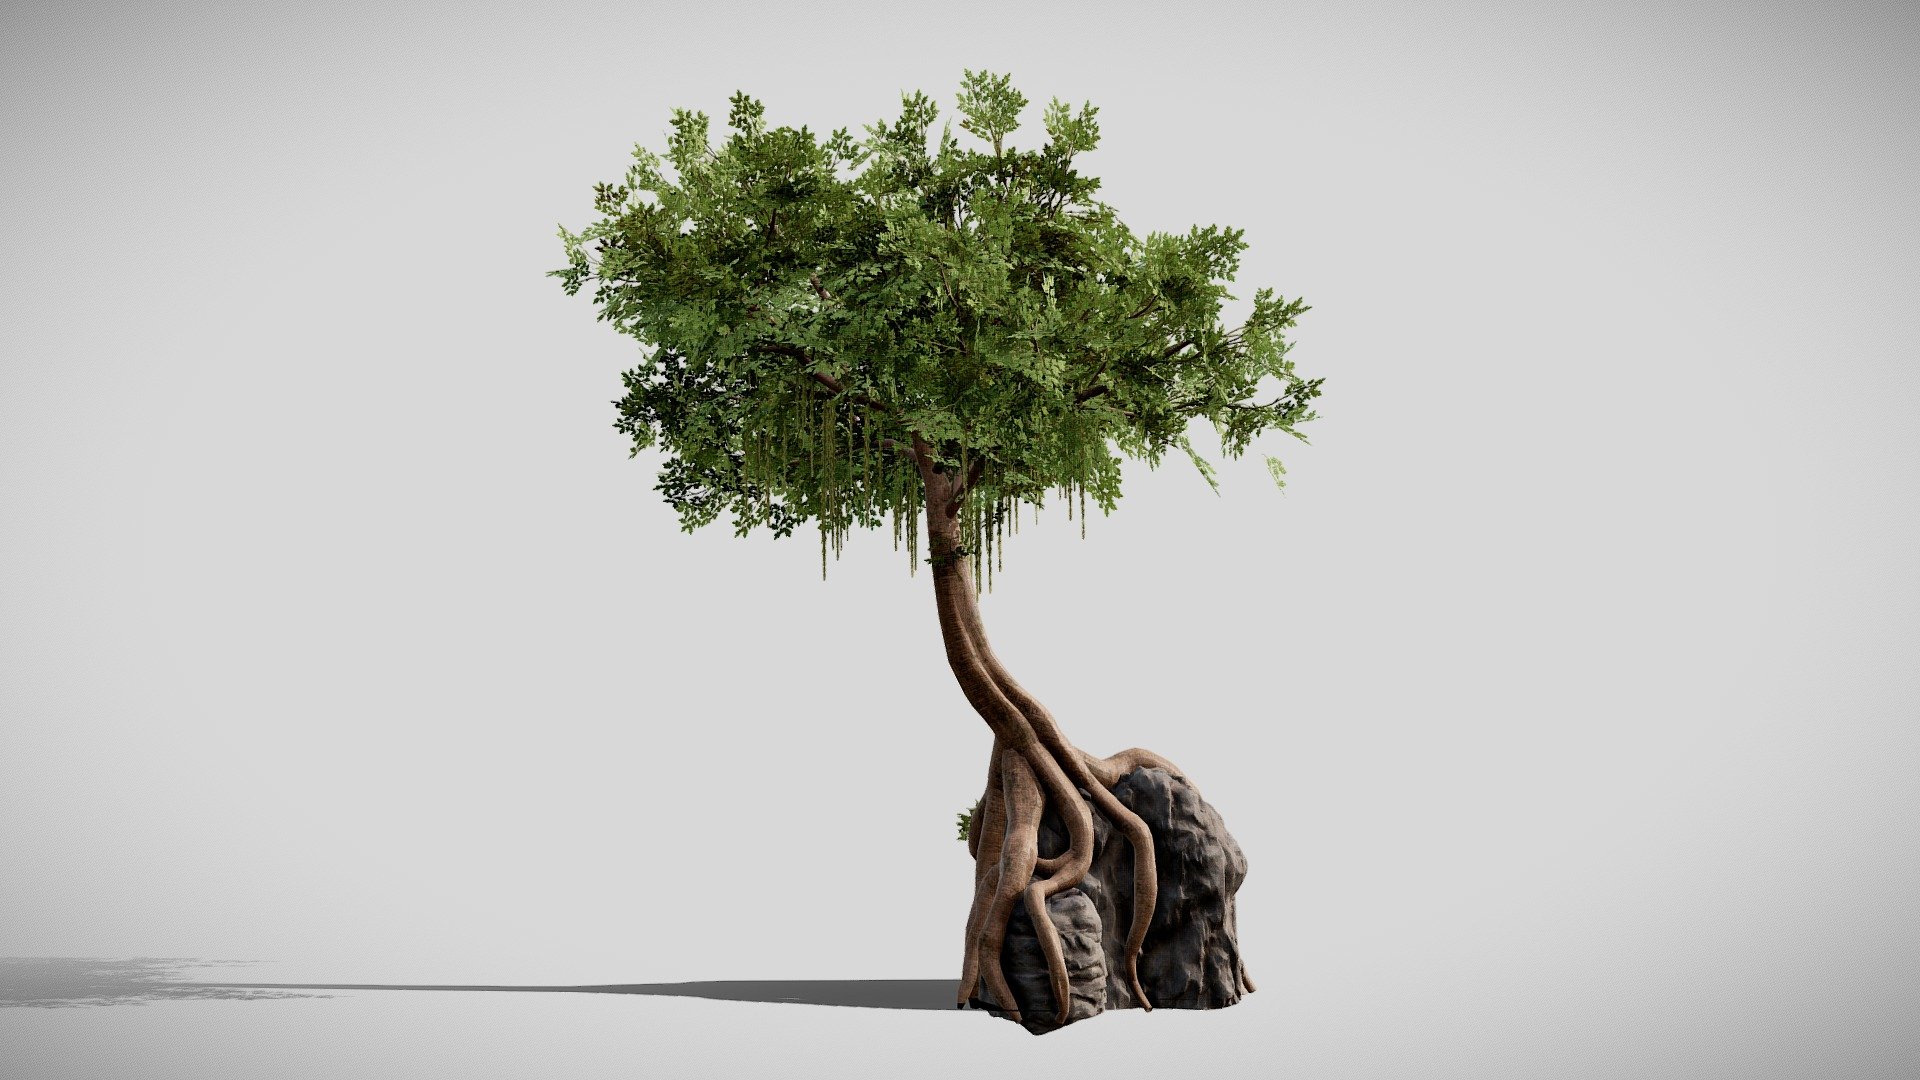 Details:

.fbx files

Low poly

Game Ready Asset

LODs + Billboard

Textures are 4K resolution (Albedo .tif with alpha channel)

Contact me for any issue or questions https://www.artstation.com/bpaul/profile - Tree On Rock - Buy Royalty Free 3D model by Paul (@nathan.d1563) 3d model